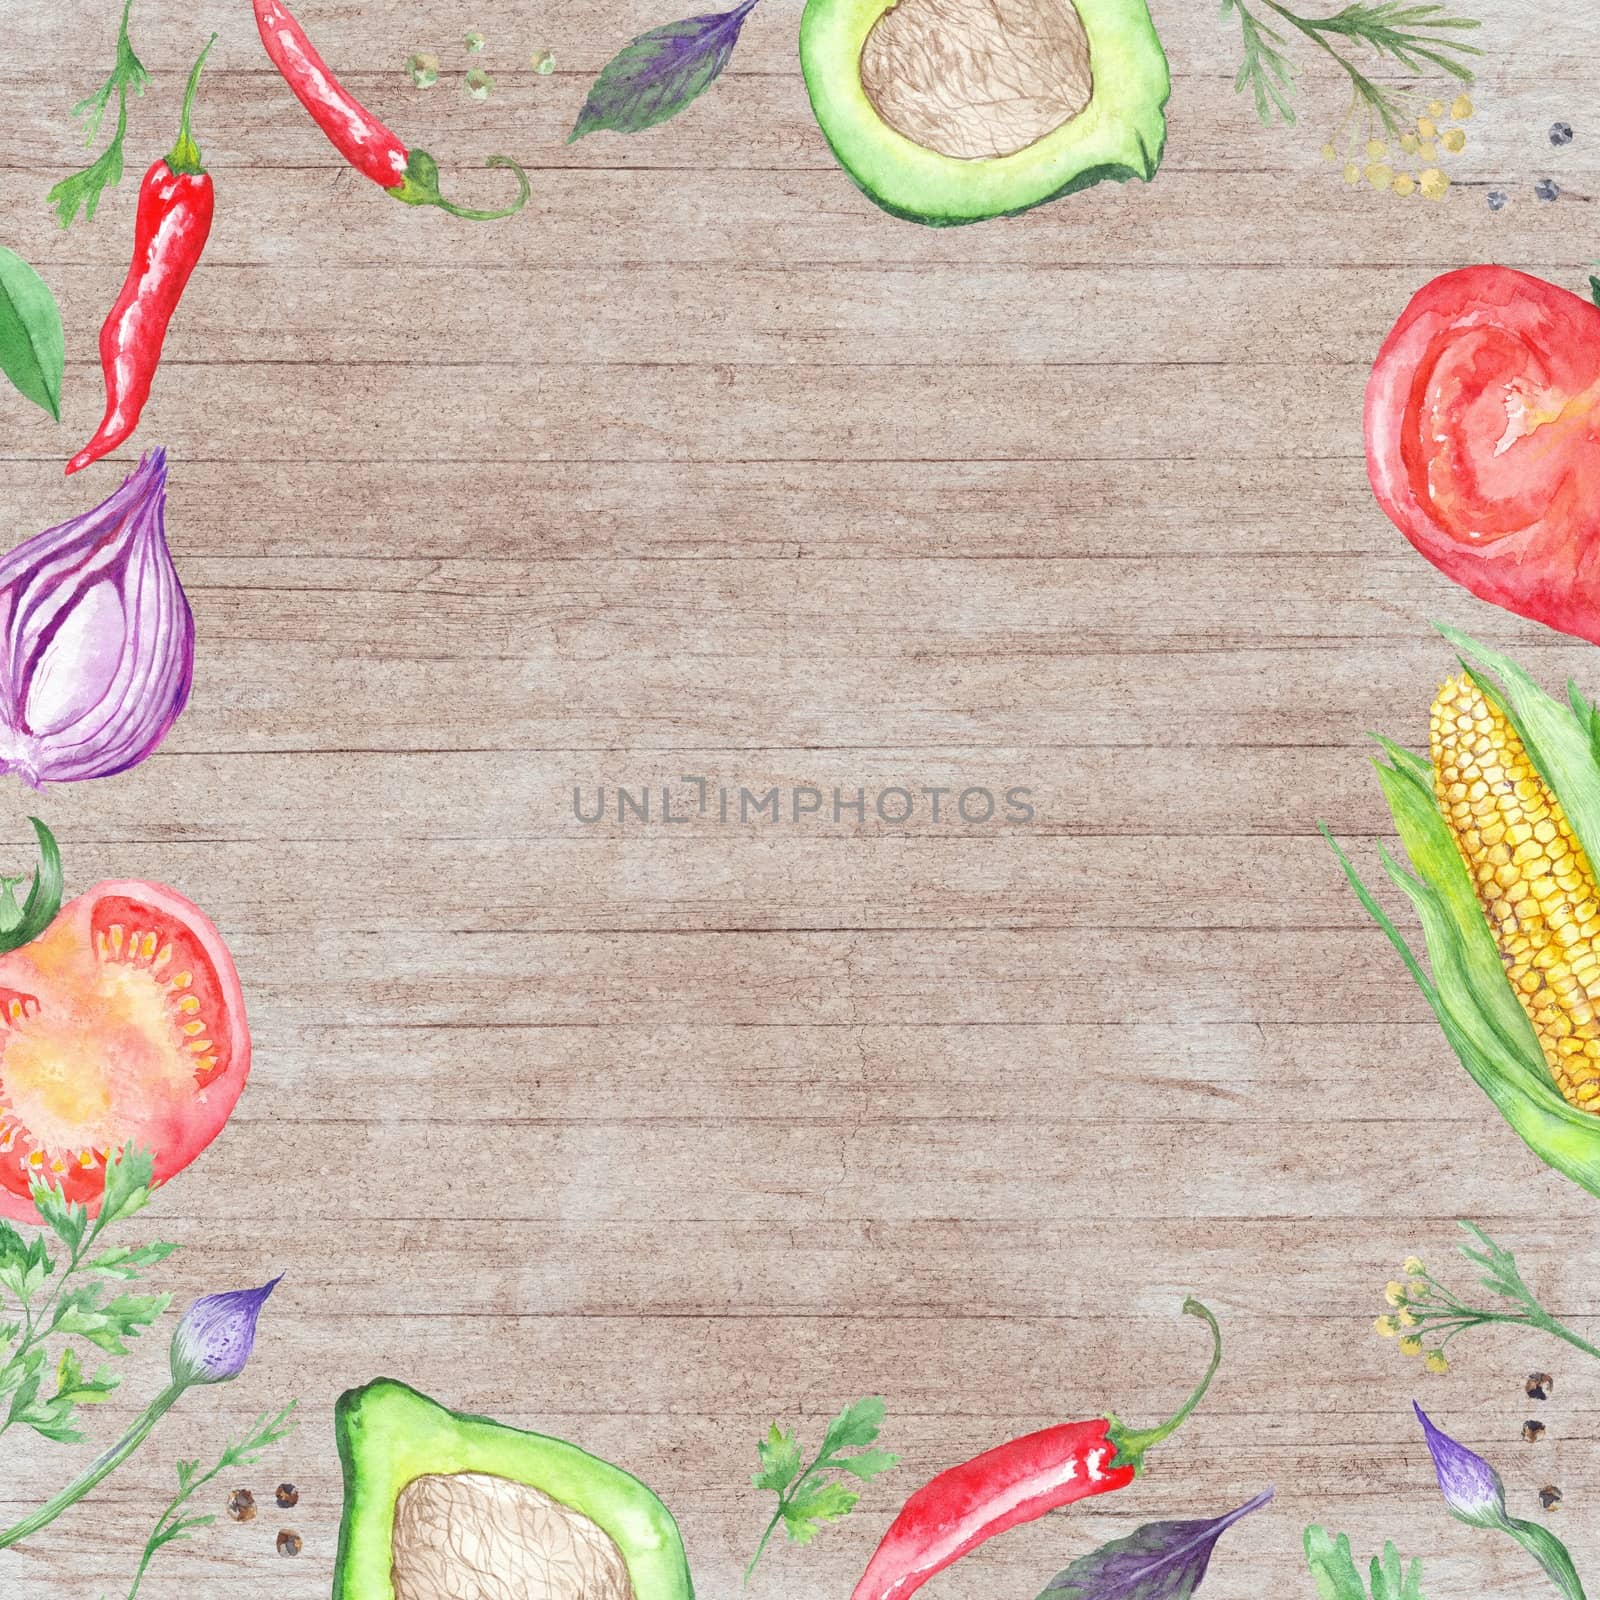 Wood table background with hand painted Vegetable border frame for kitchen and restaurant design